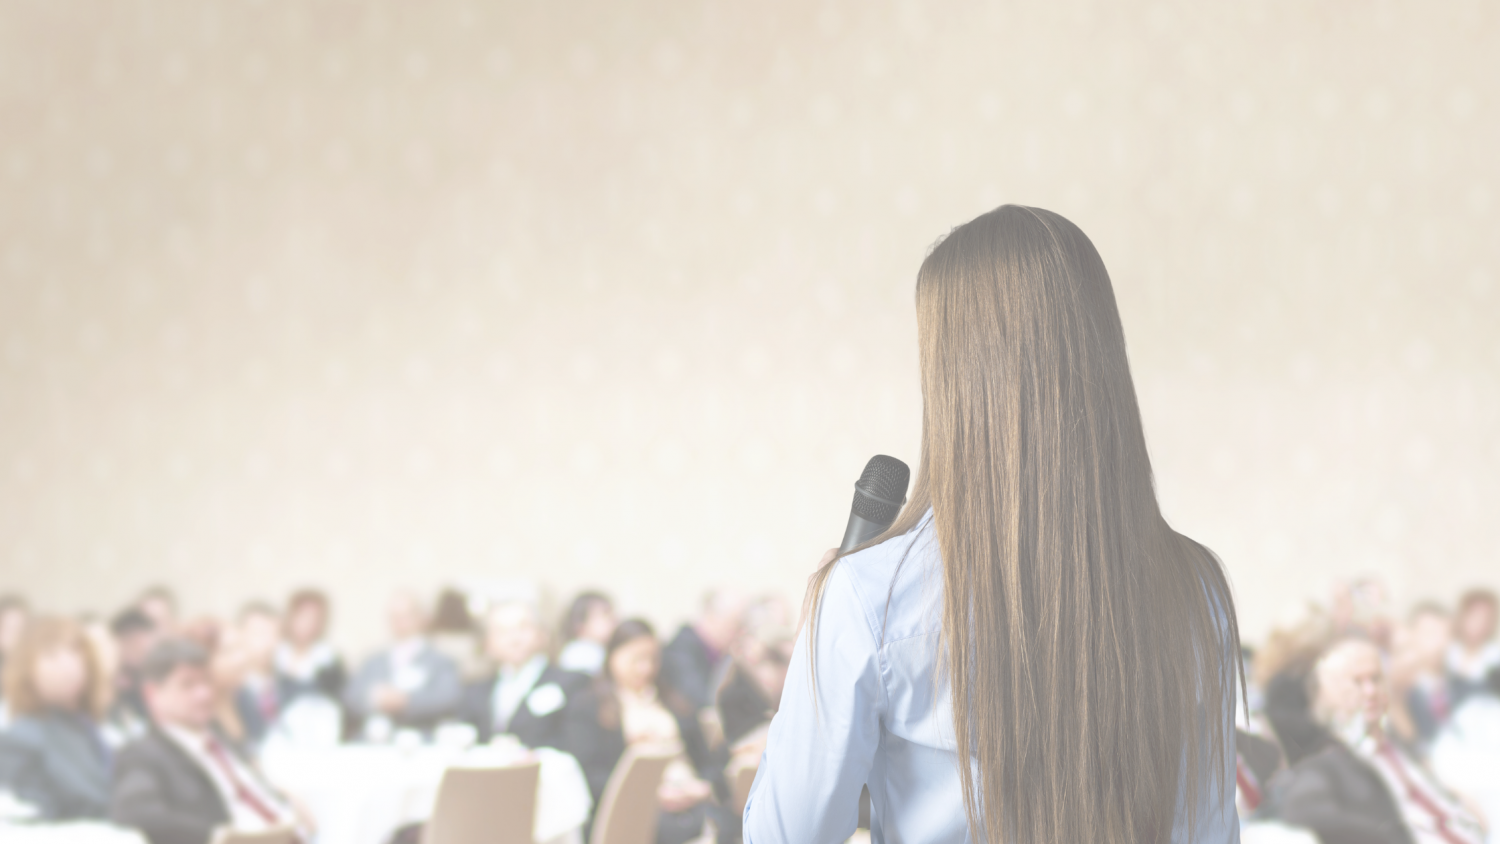 Top 10 Public Speaking Tips for Business Professionals